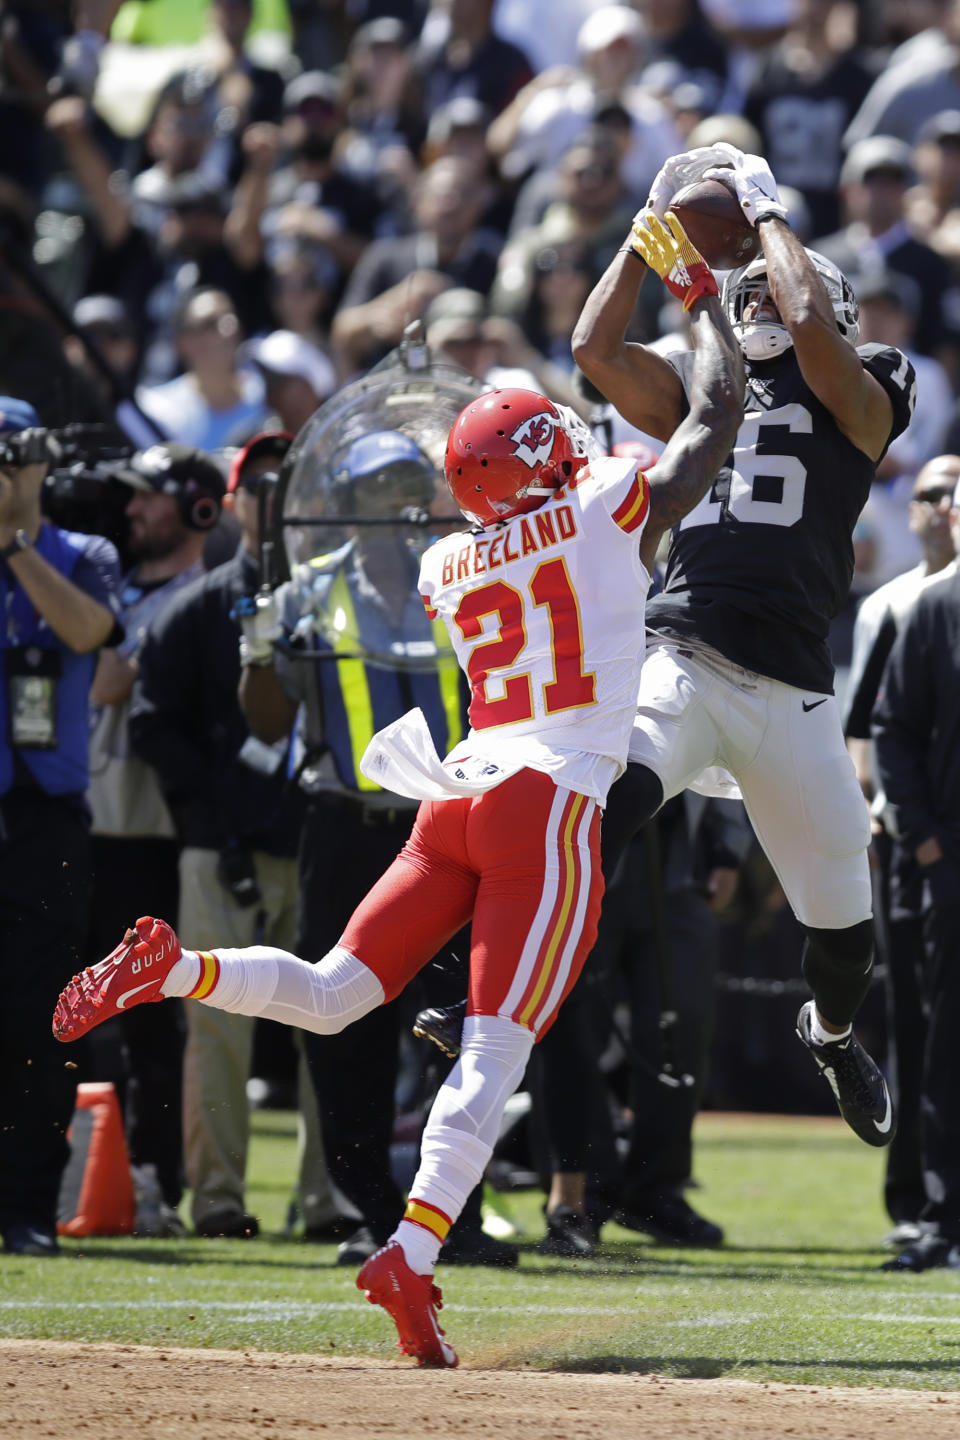 Oakland Raiders wide receiver Tyrell Williams (16) catches a pass as Kansas City Chiefs defensive back Bashaud Breeland (21) looks on during the first half of an NFL football game Sunday, Sept. 15, 2019, in Oakland, Calif. (AP Photo/Ben Margot)